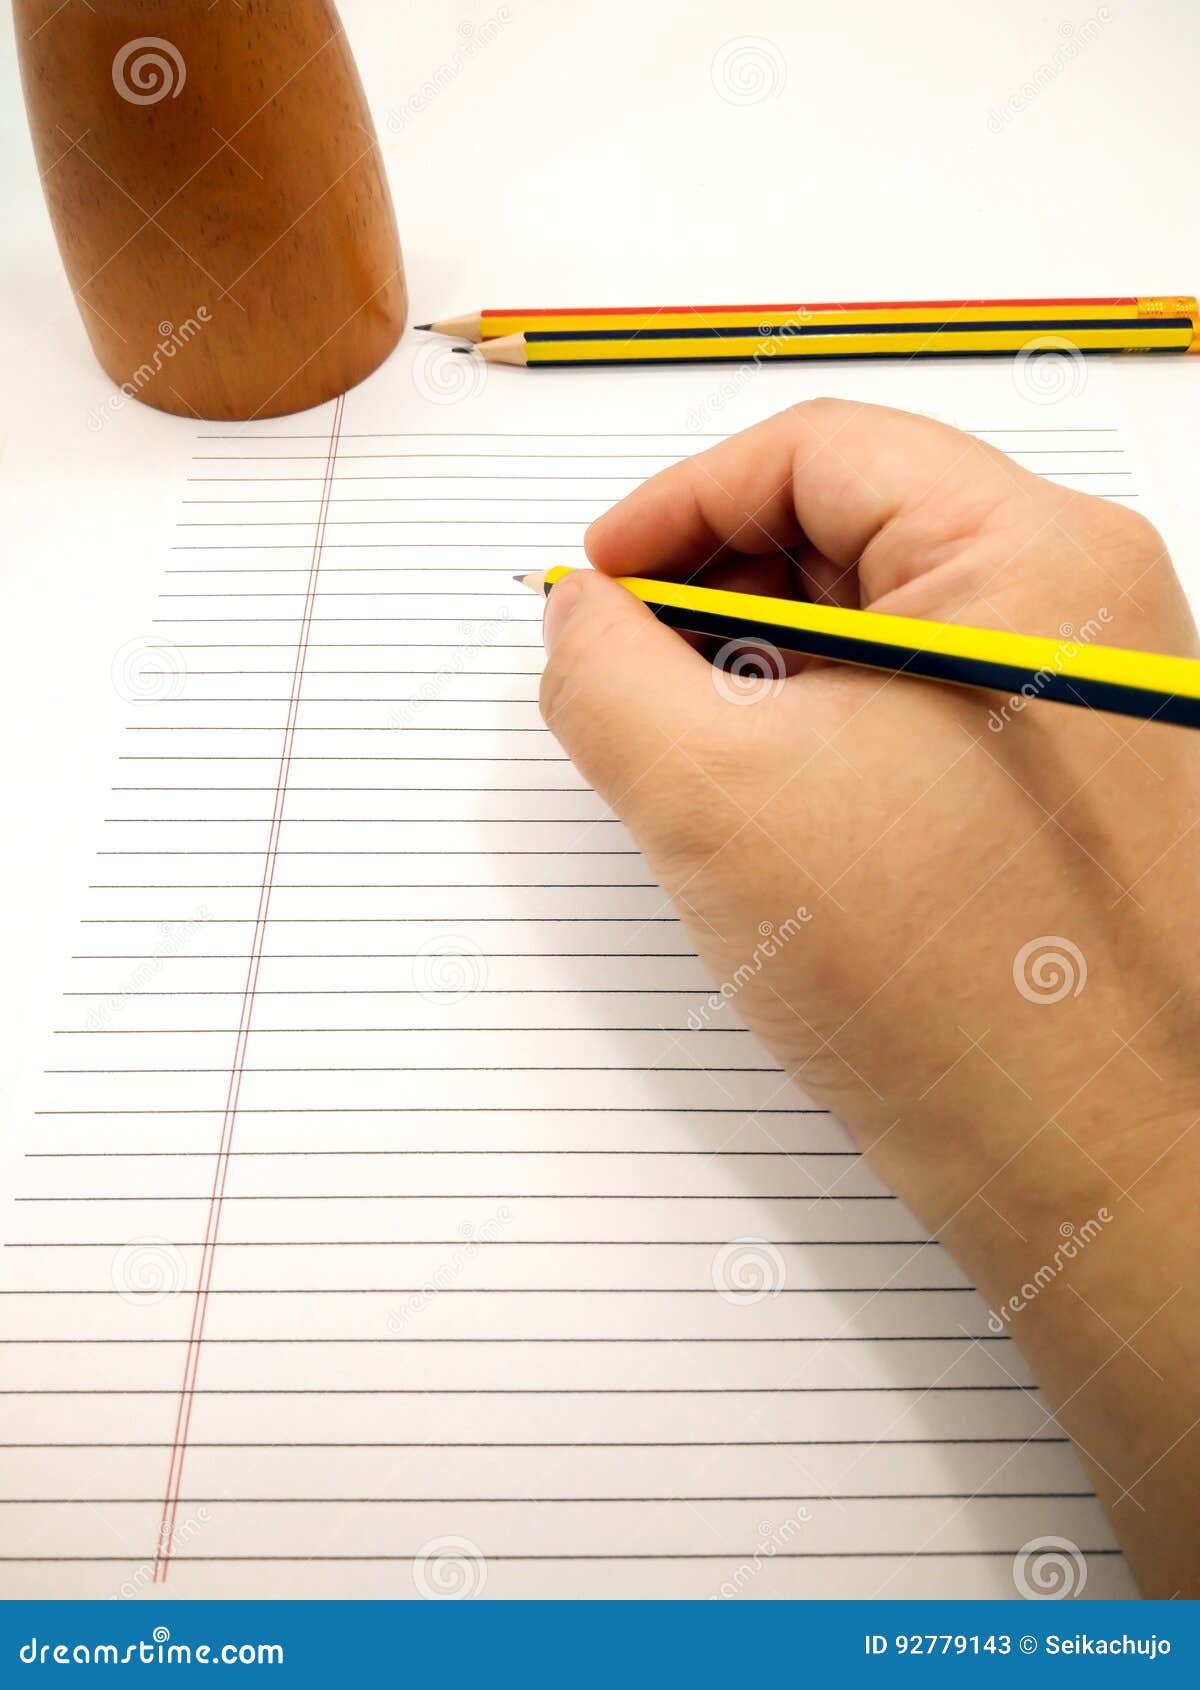 Writing on Blank Paper stock image. Image of holds, lined - 92779143